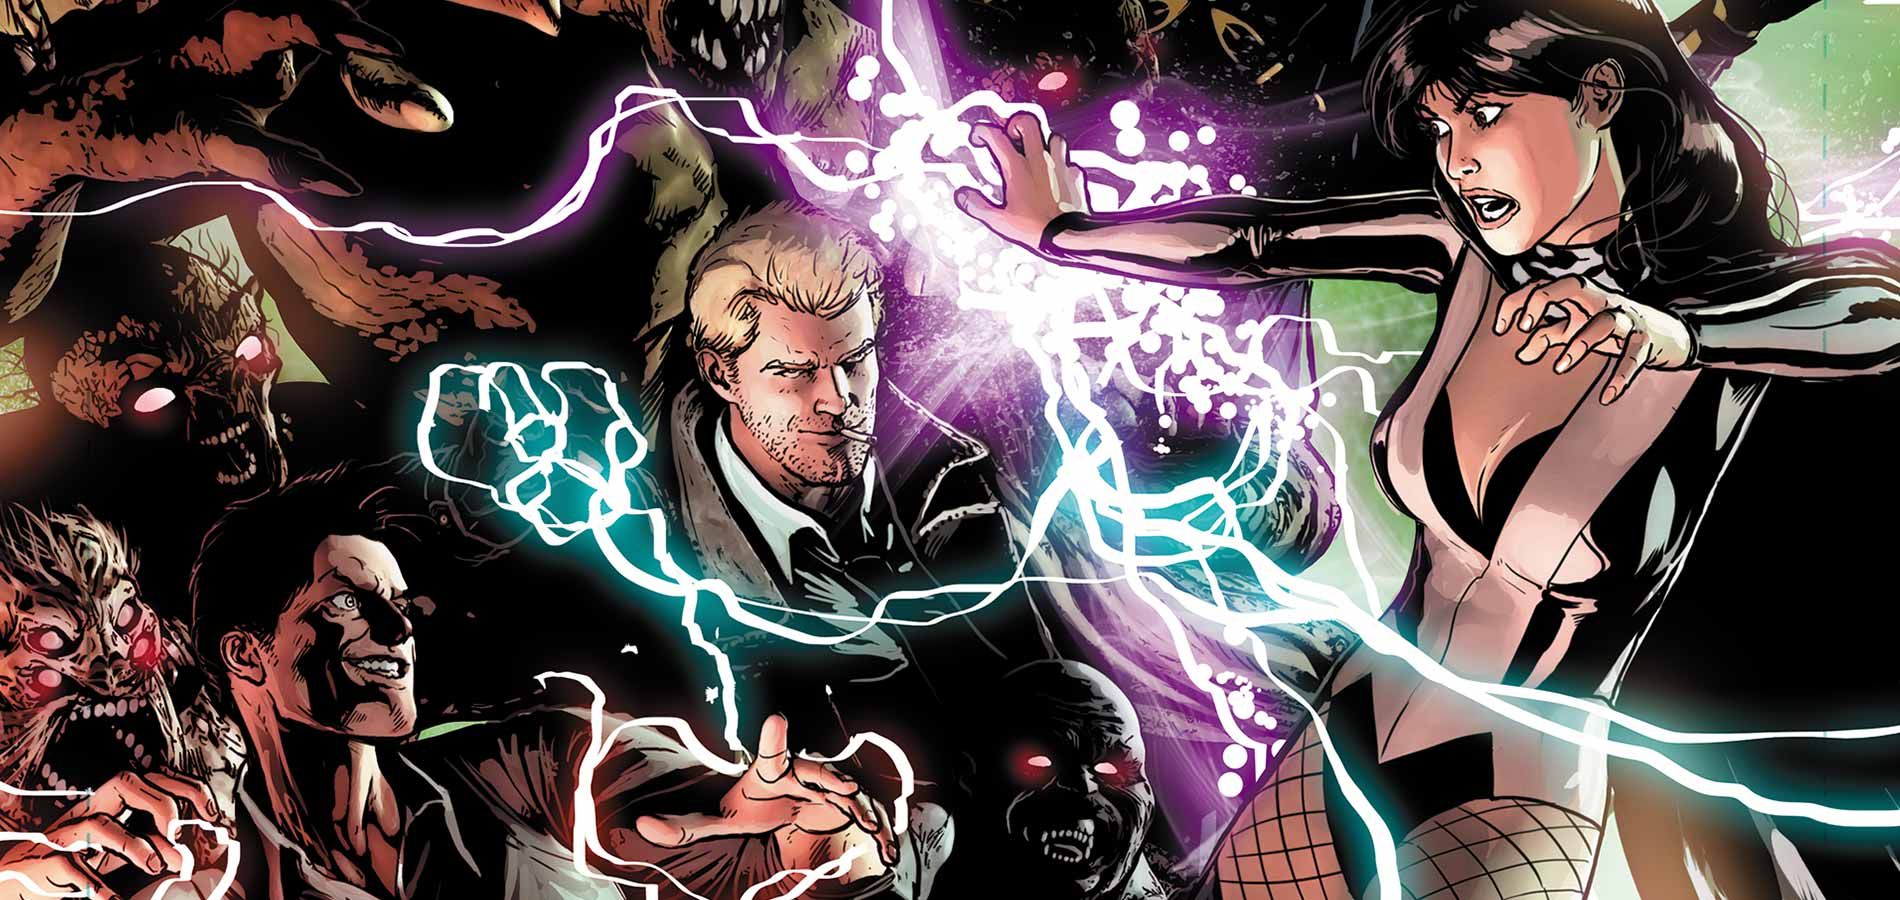 Justice League Dark & Return of the Caped Crusaders Head to NYCC